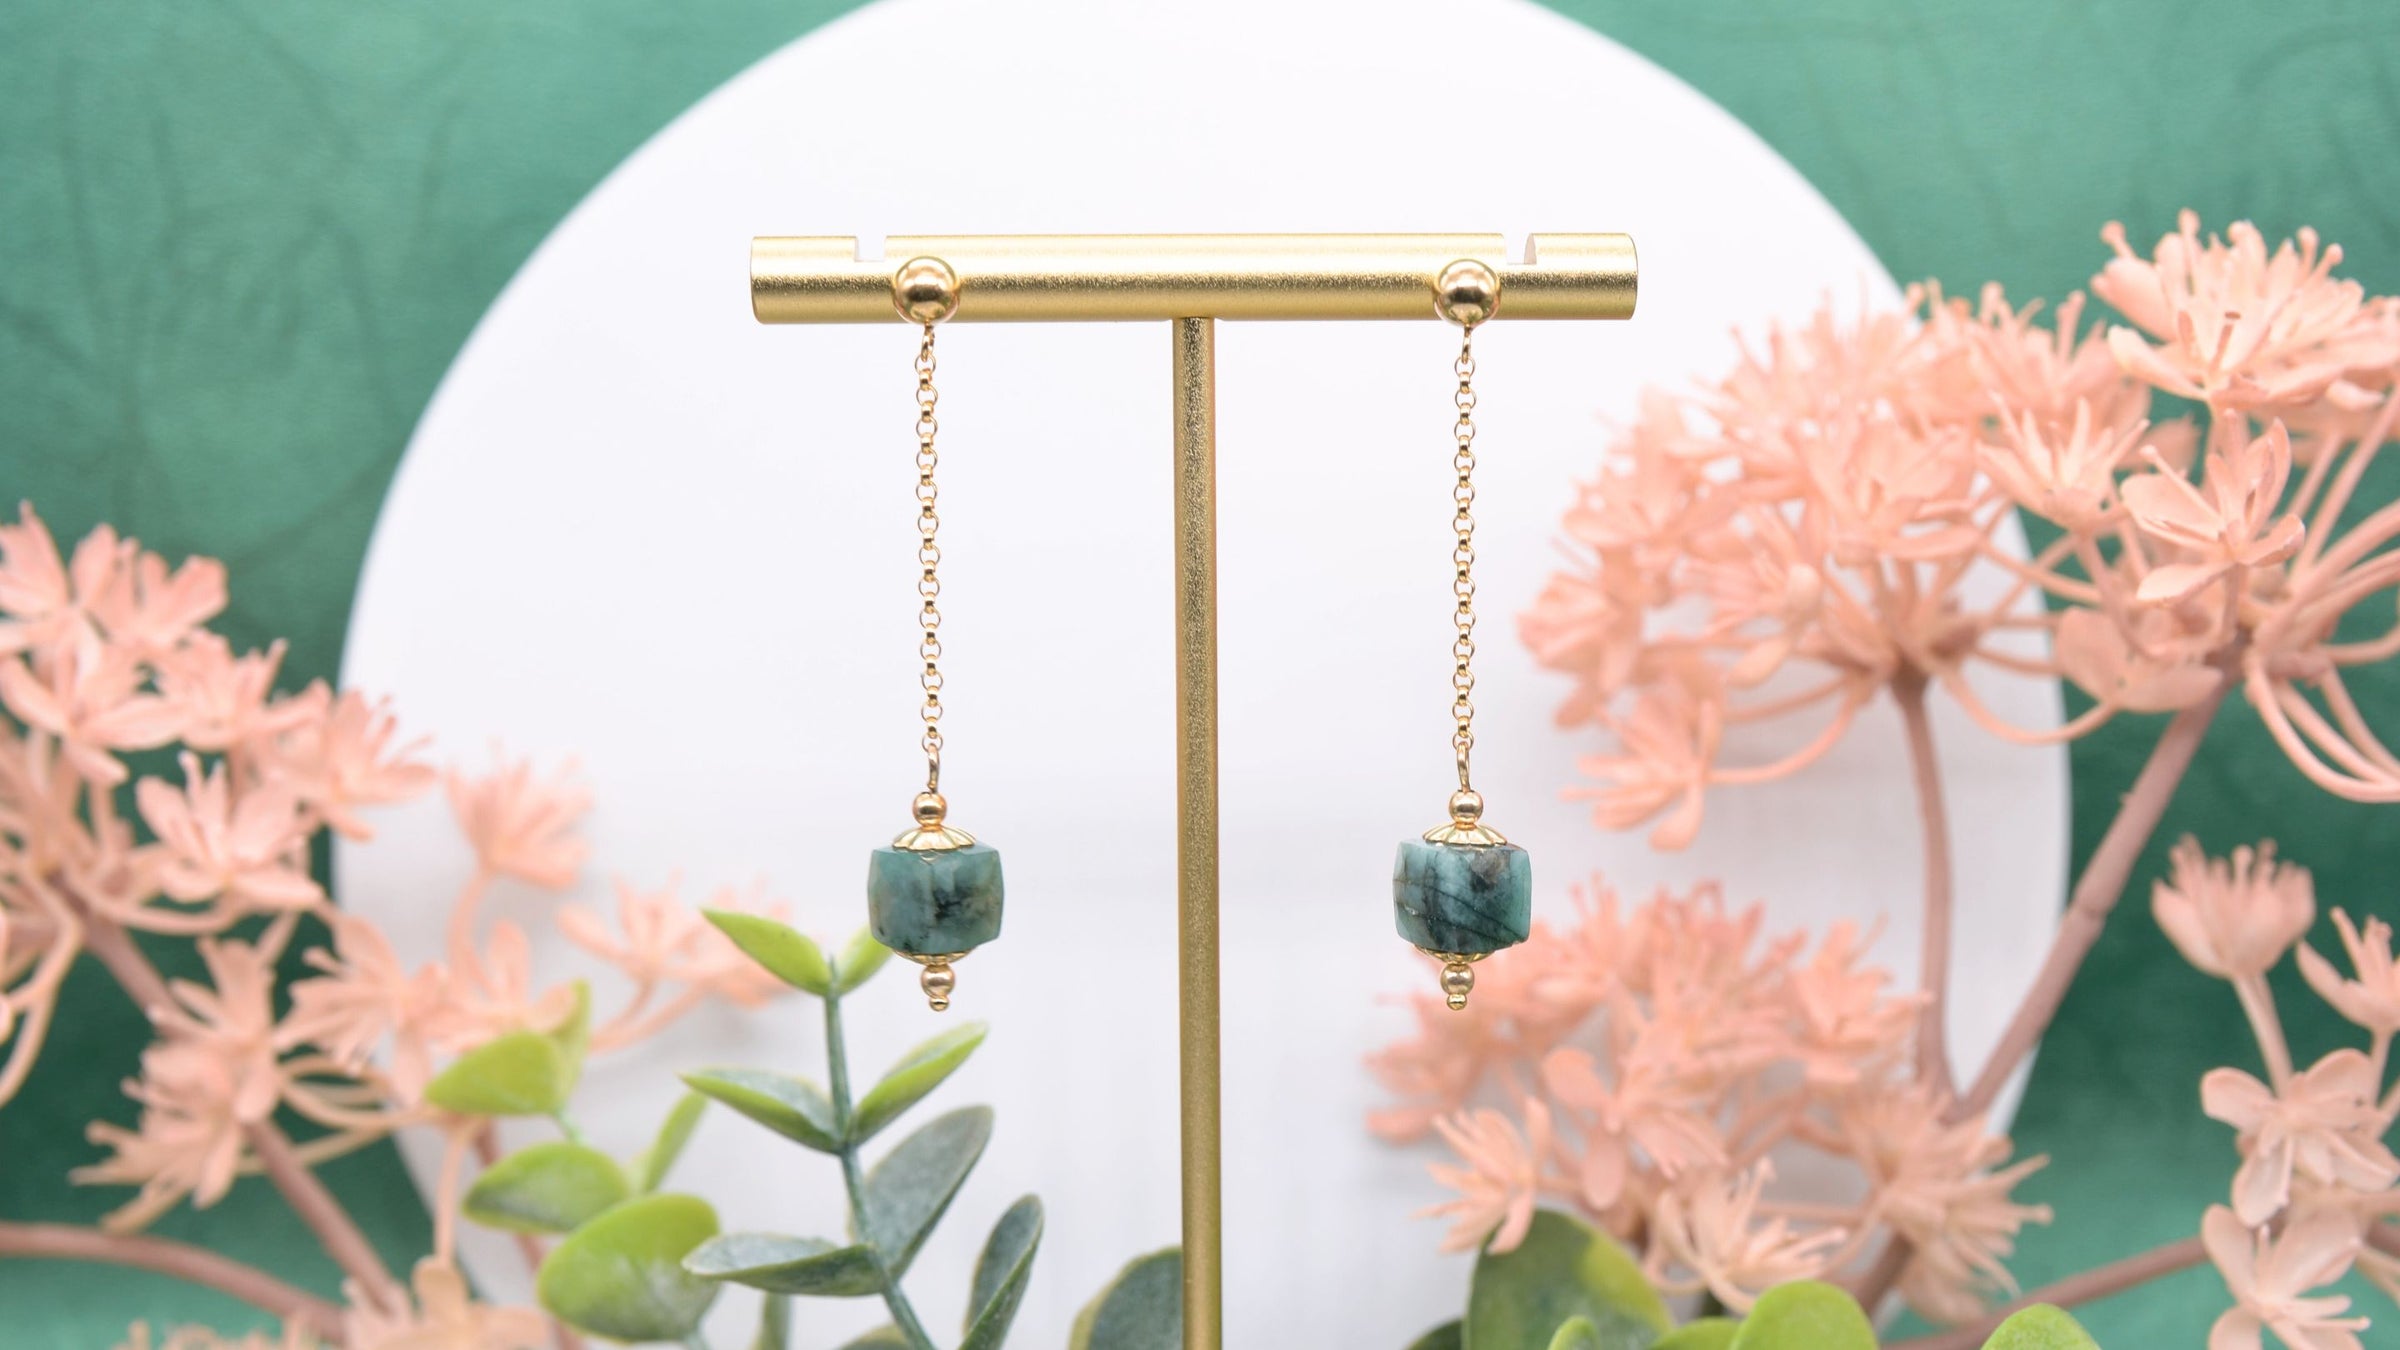 The image shows a pair of earrings with Emerald gemstones and gold chain with greenery surrounding it. Included are 2 buttons that say "Shop All" on the left and "All Earrings" on the right. Natural gemstone jewelry by Emerald Sun Creations